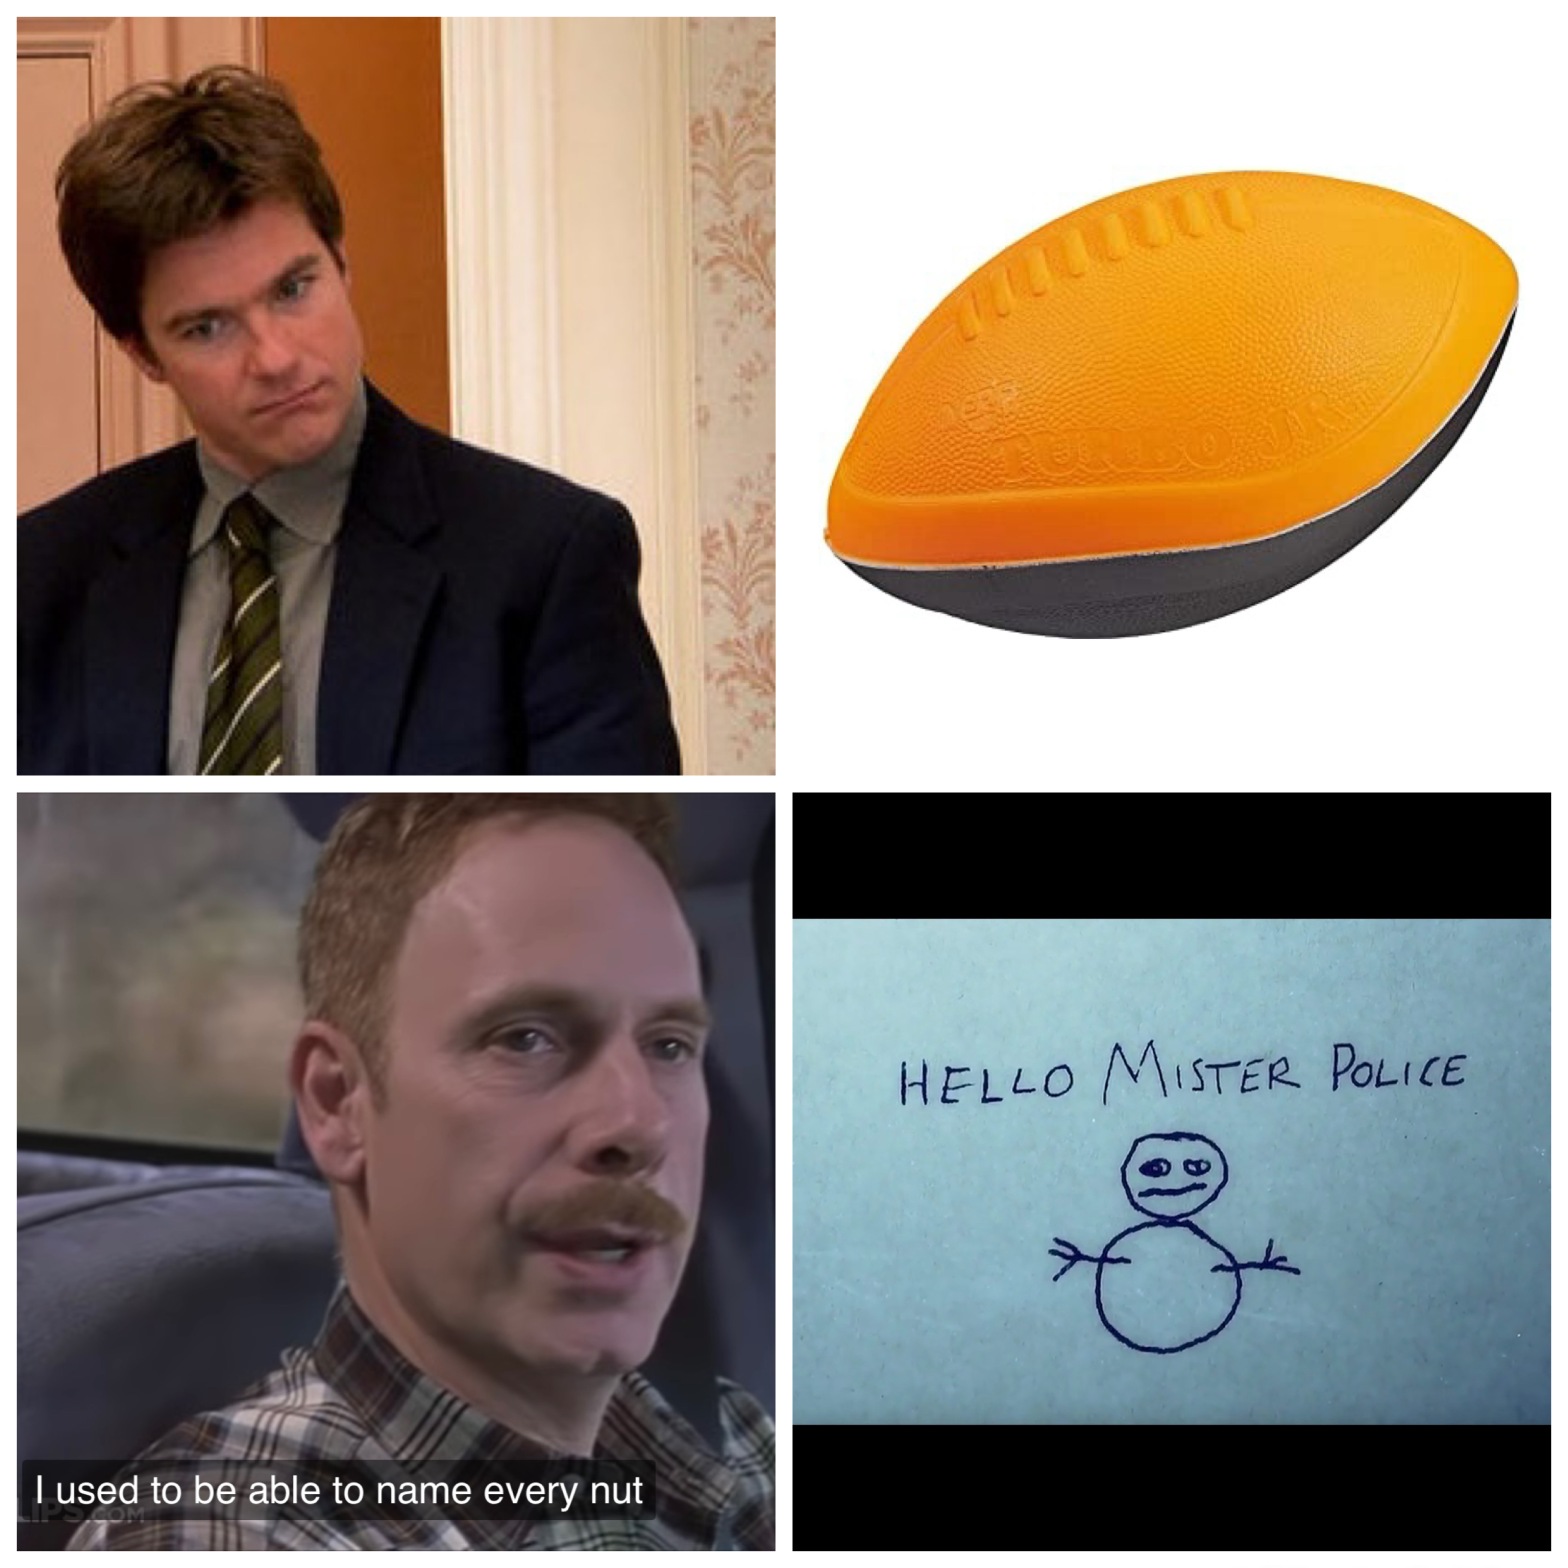 Michael Bluth from Arrested Development, a Nerf foam football, Christopher Guest from Best In Show, and Hello Mister Police from The Snowman.